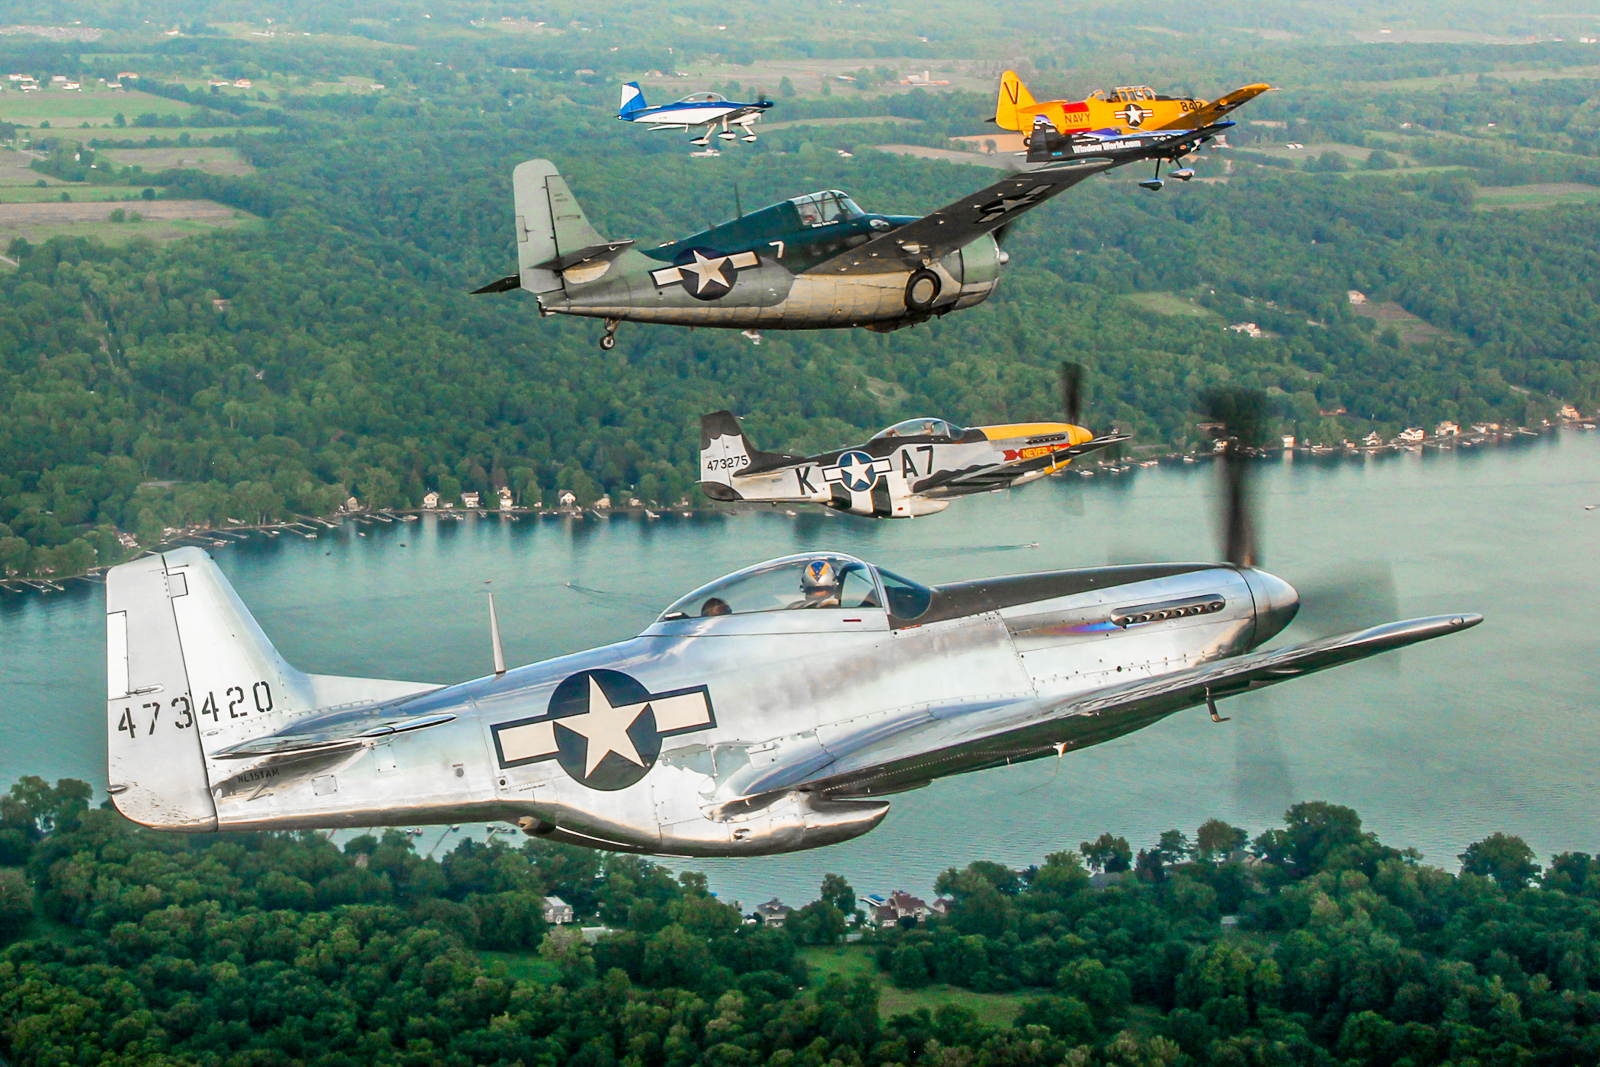 A mighty formation over the Genesee Valley featuring Andrew McKenna in his P-51D Mustang alongside Greg Shelton in the FM-2 Wildcat, Mark Murphy in another P-51D, Rob Holland in the MXS-RH, Jerry Kerby in the RV-8A and Dave Murphy in the Texan. (photo by Tom Pawlesh)